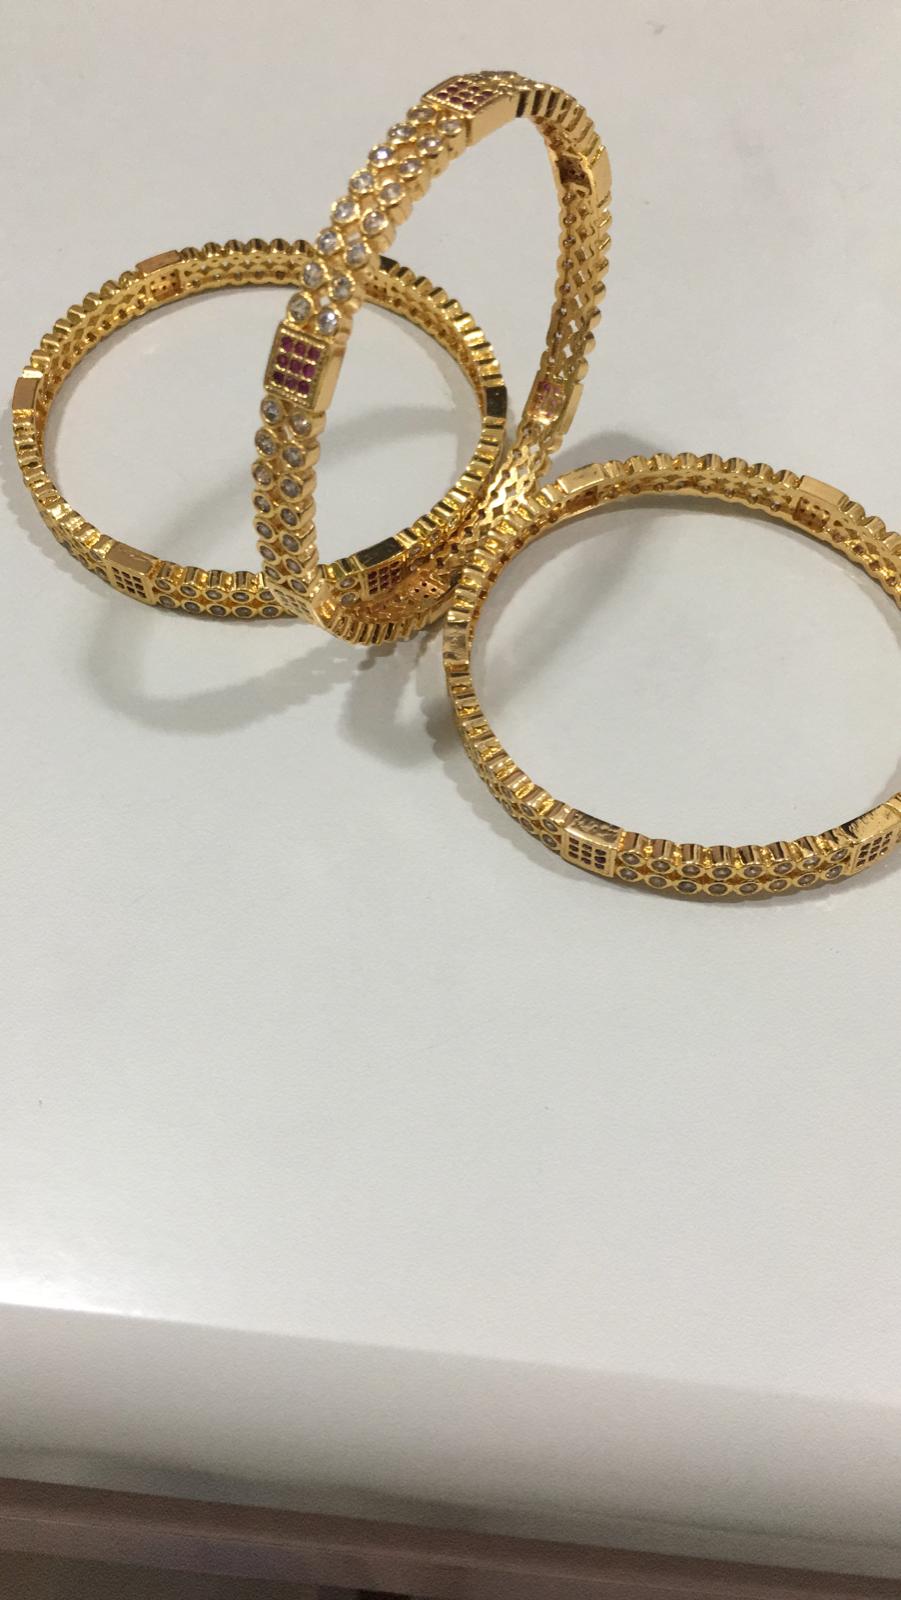 157660C $20.00 1PC BANGLE (GOLD PLATED)